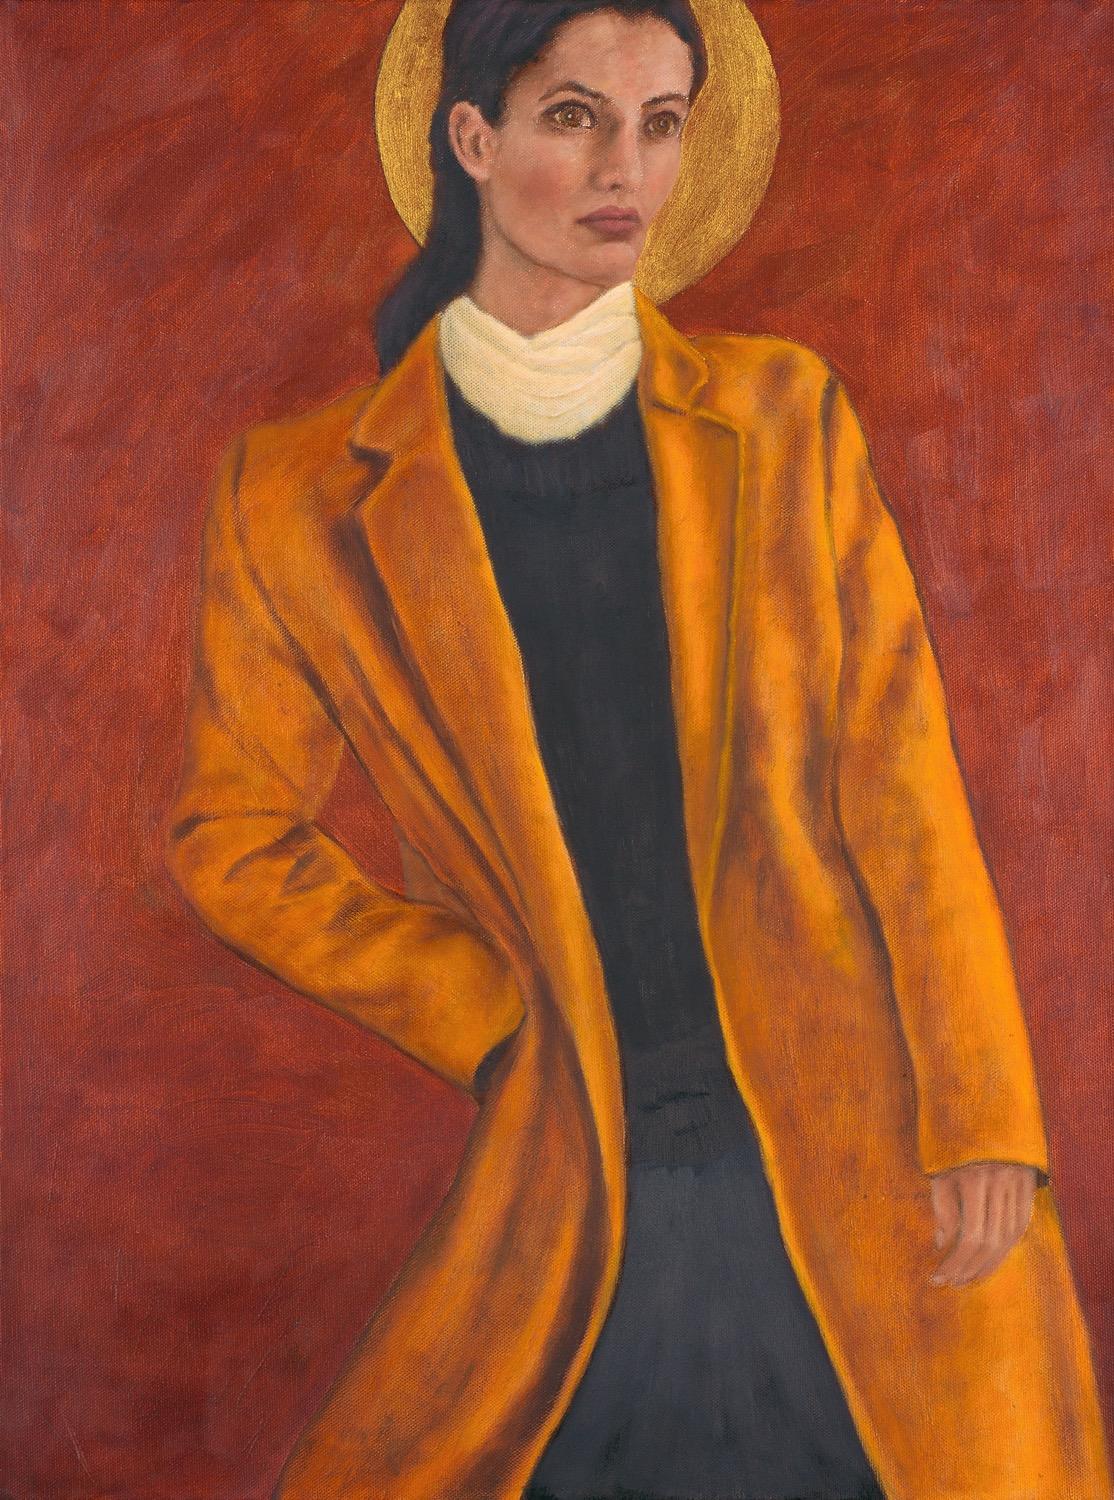 Gary Masline Figurative Painting - Oil on Canvas -- Fashionista Moon